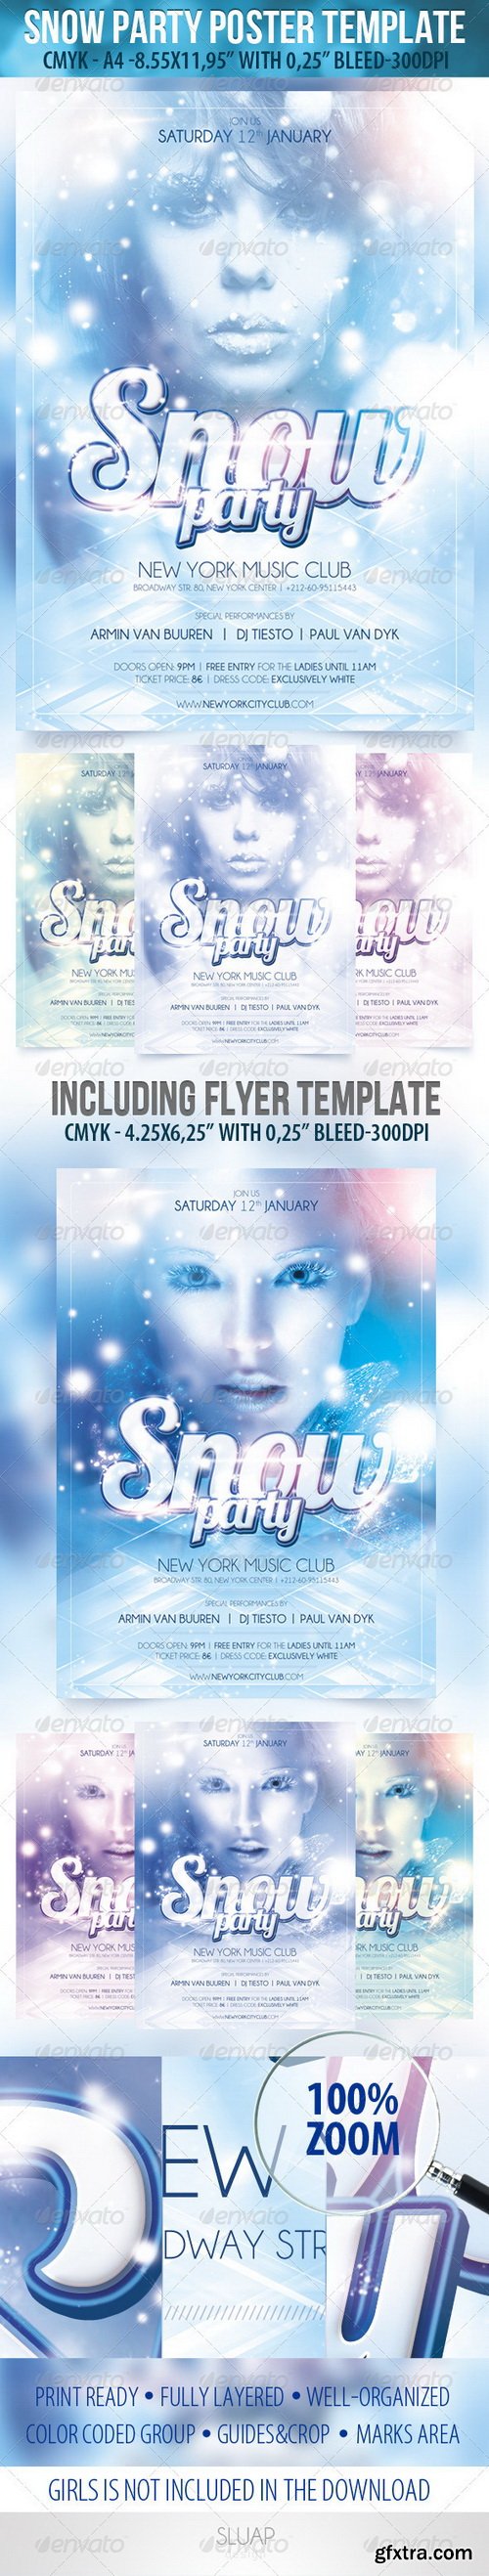 GraphicRiver - Snow Party-Poster Template & Snow Party-Flyer Temp 3595705